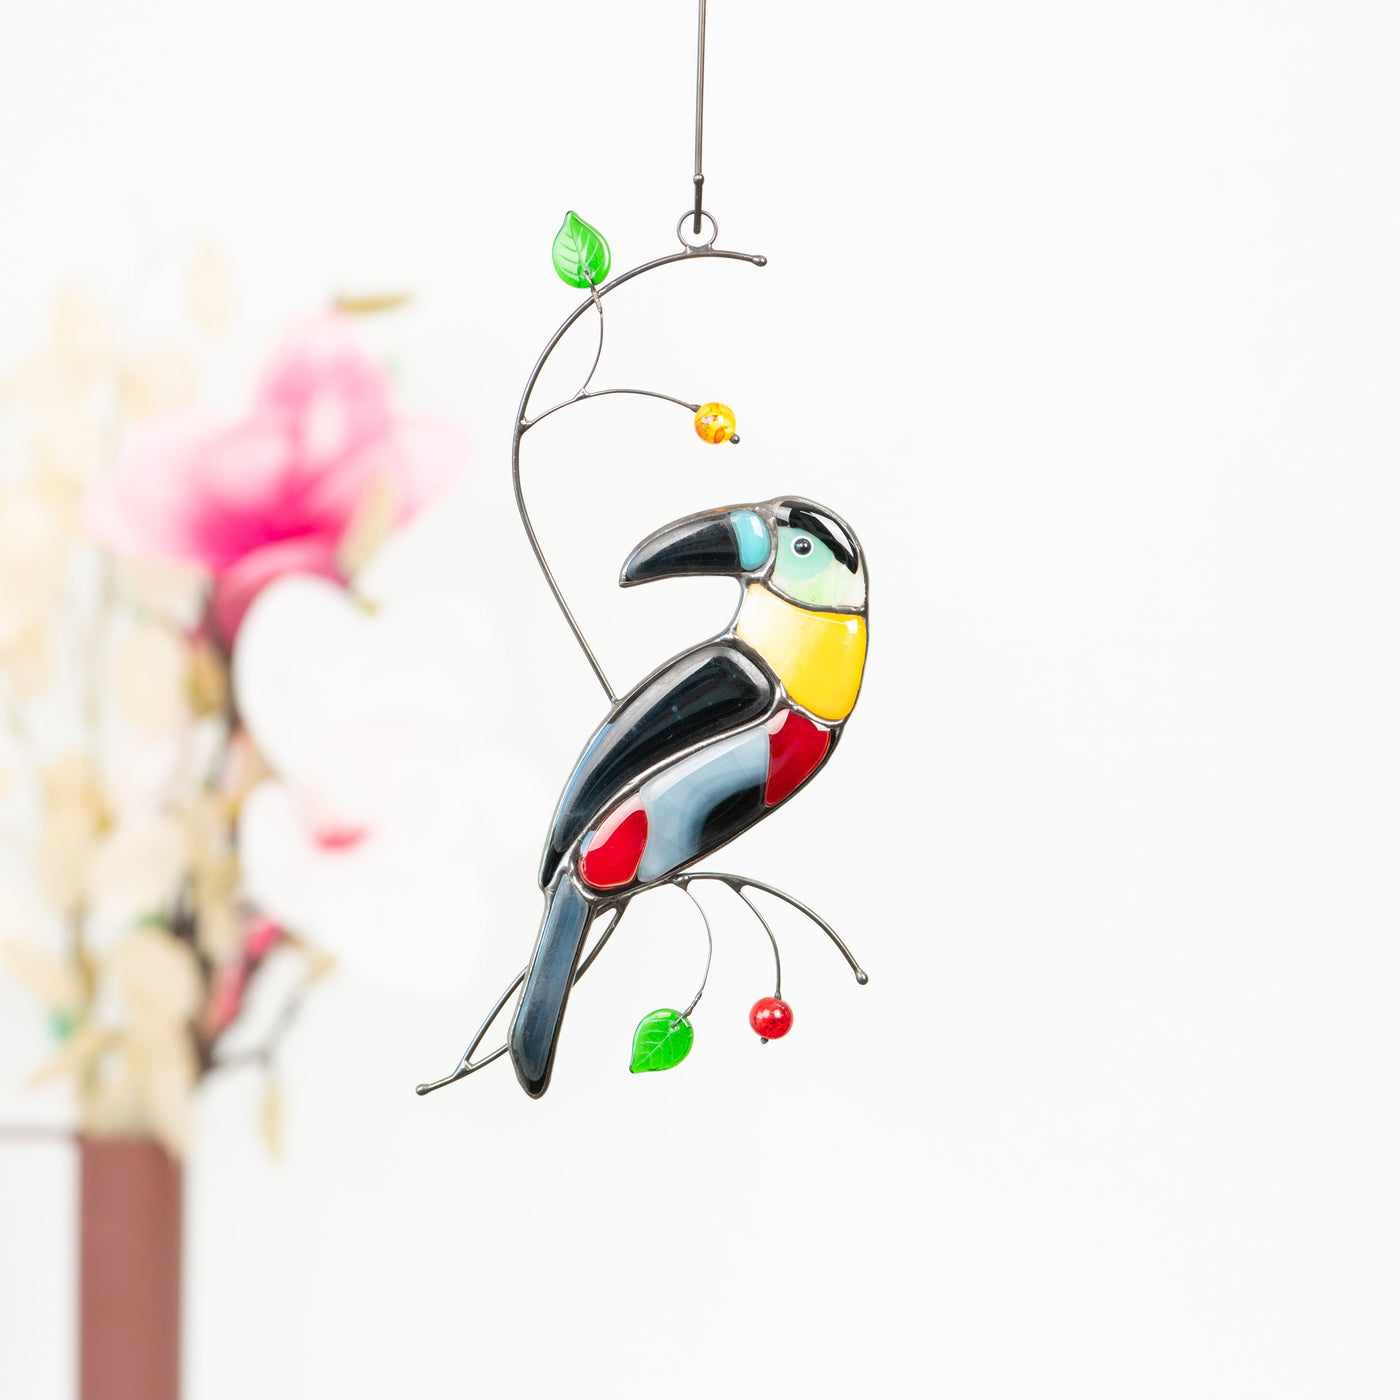 Stained glass sitting on the branch with leaves and berries  toucan with bluish head suncatcher